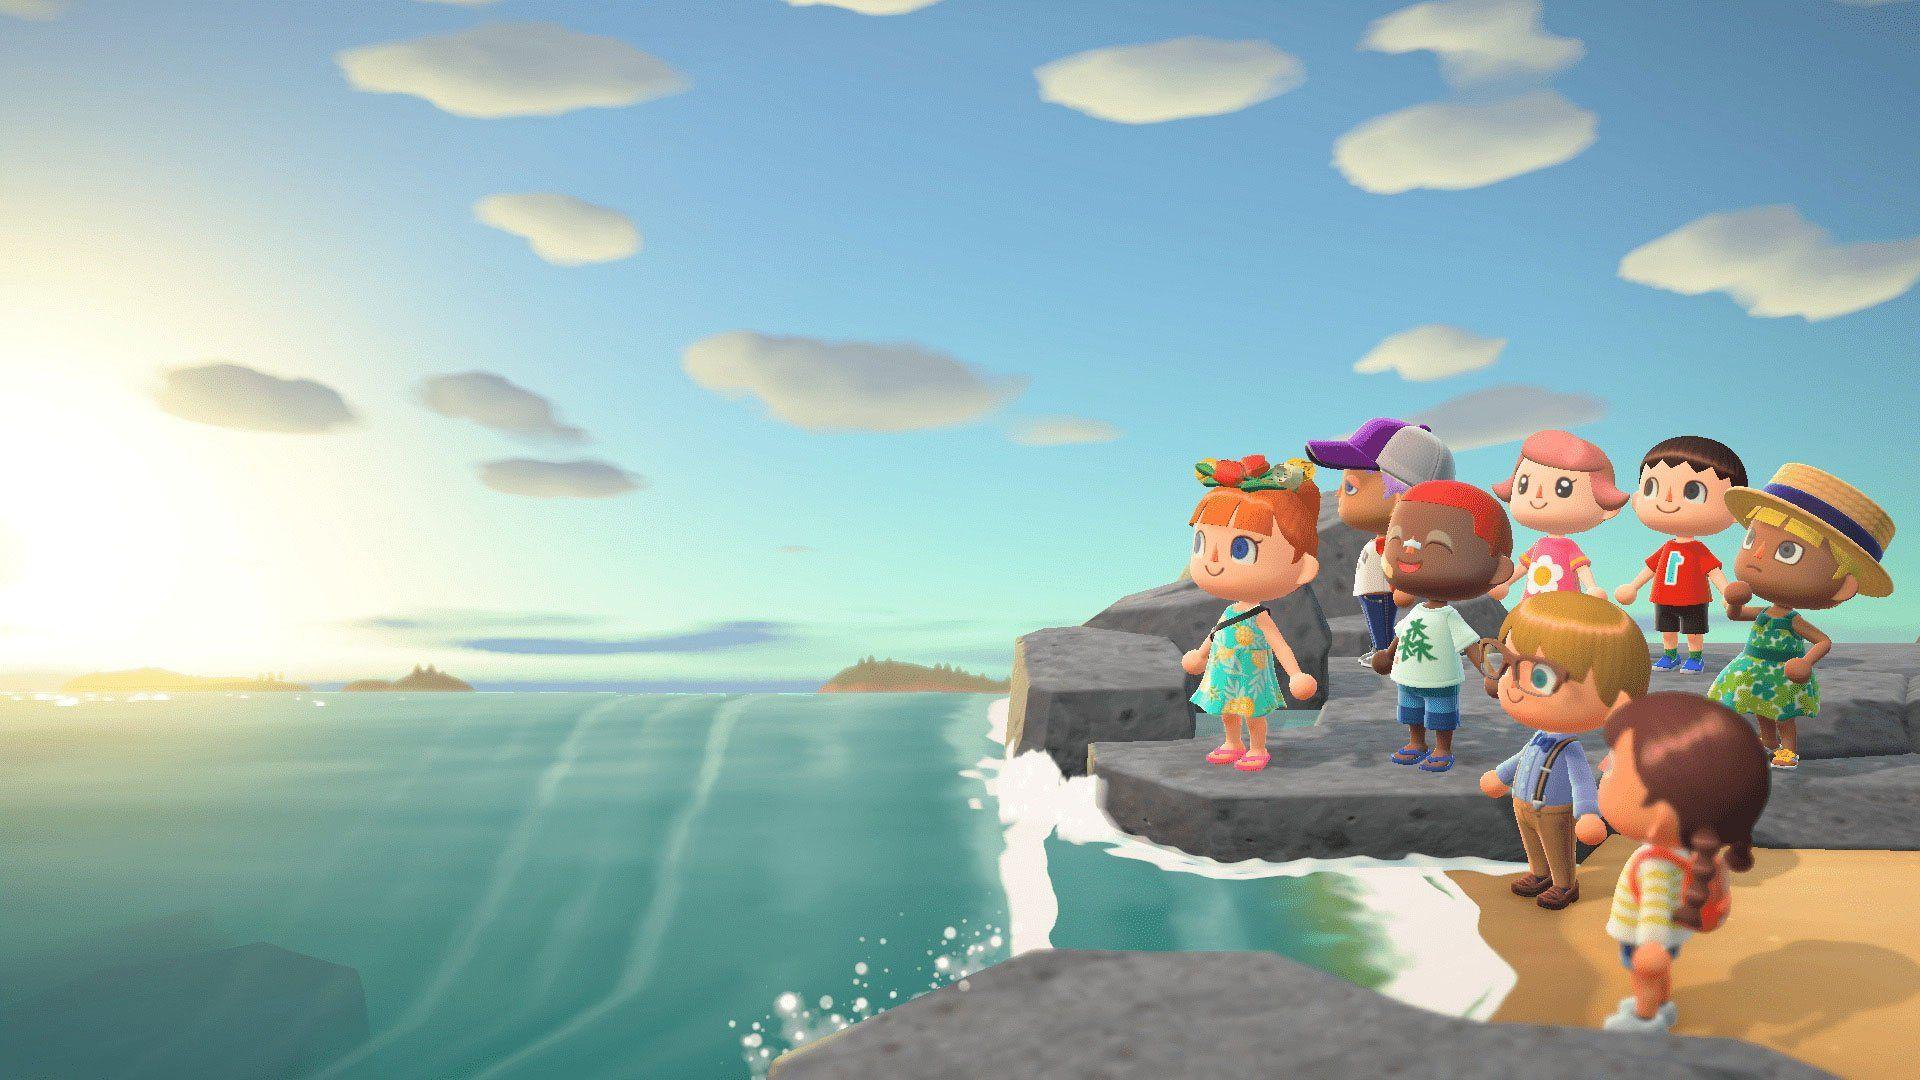 Animal crossing new horizons for pc download - panaparadise